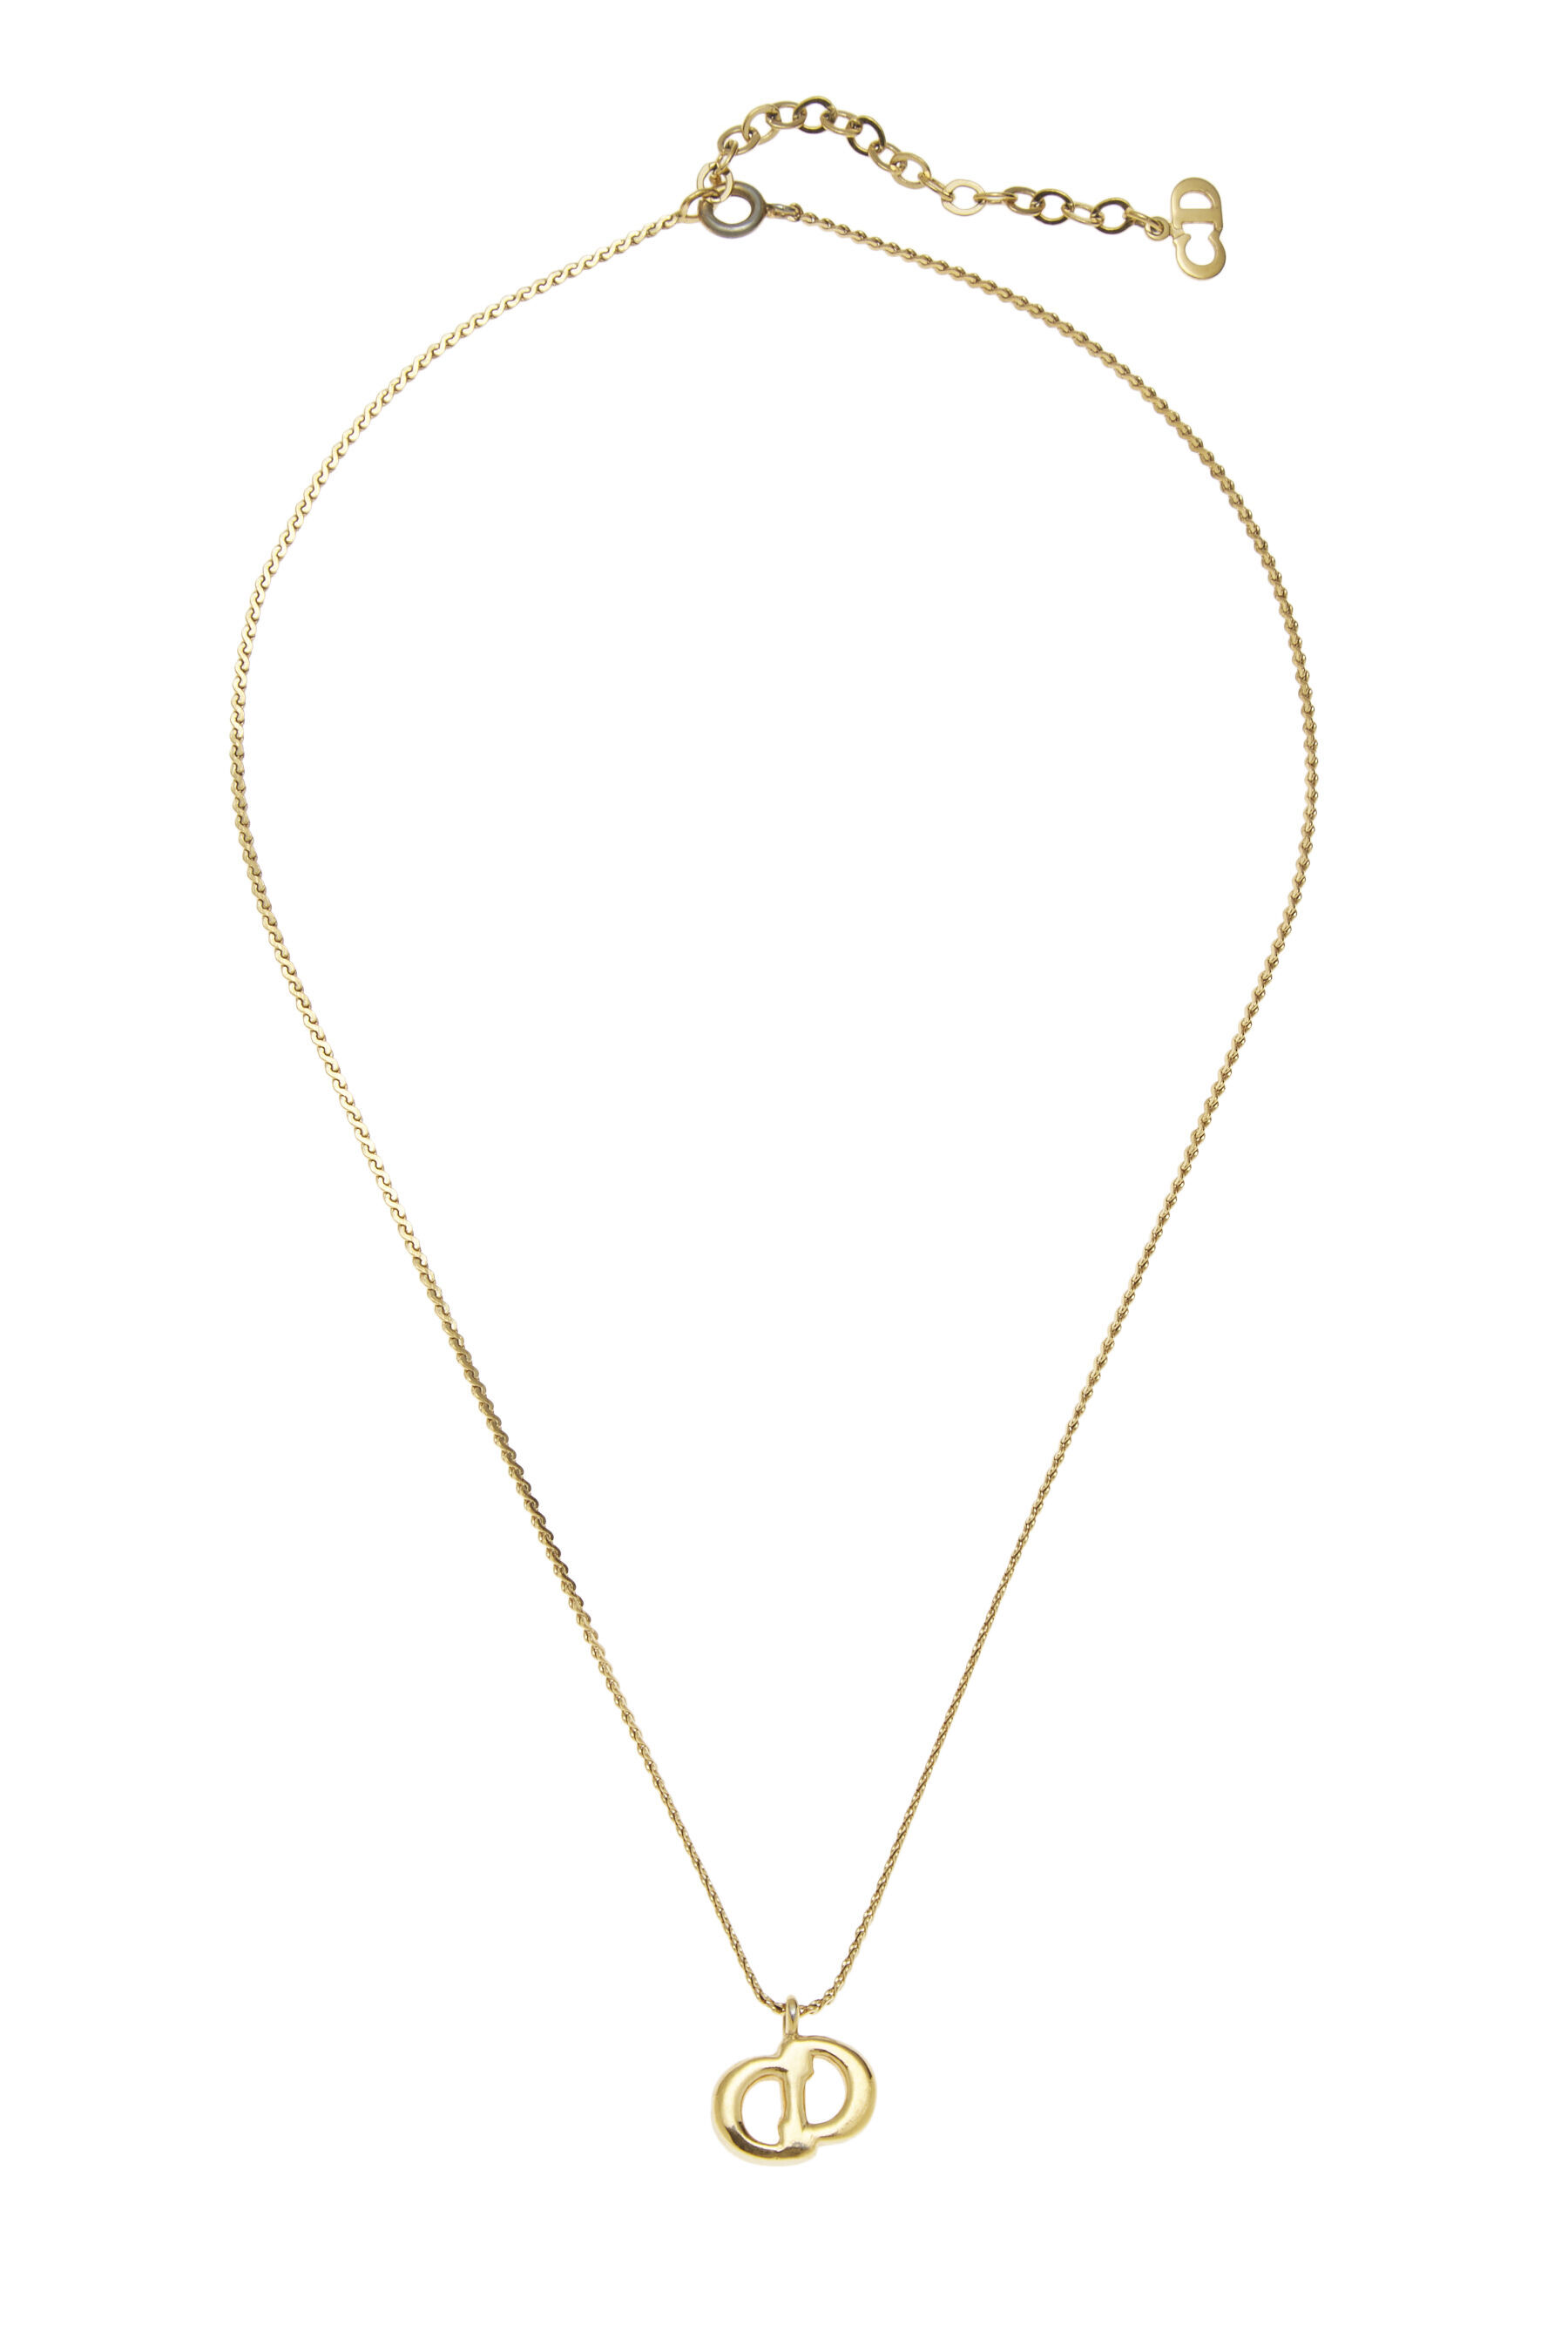 Petit CD Necklace Gold-Finish Metal and Black Lacquer | DIOR | Elegant  necklaces, Dior, Gold necklace